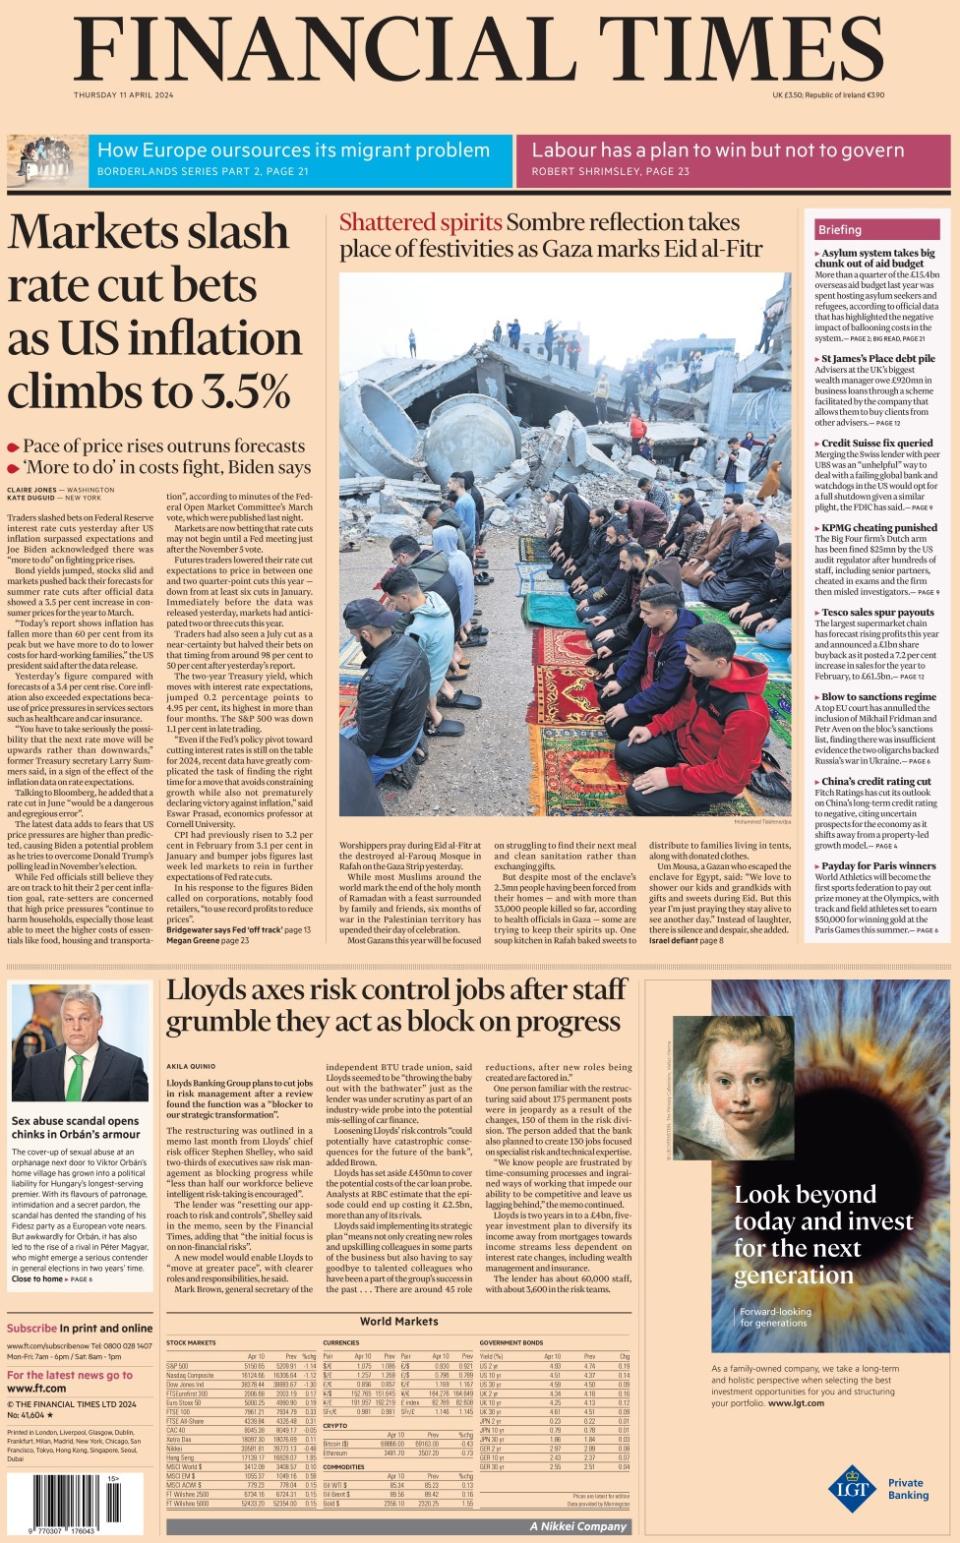 The headline in the Financial Times reads: Markets slash rate cut bets as US inflation climbs to 3.5%